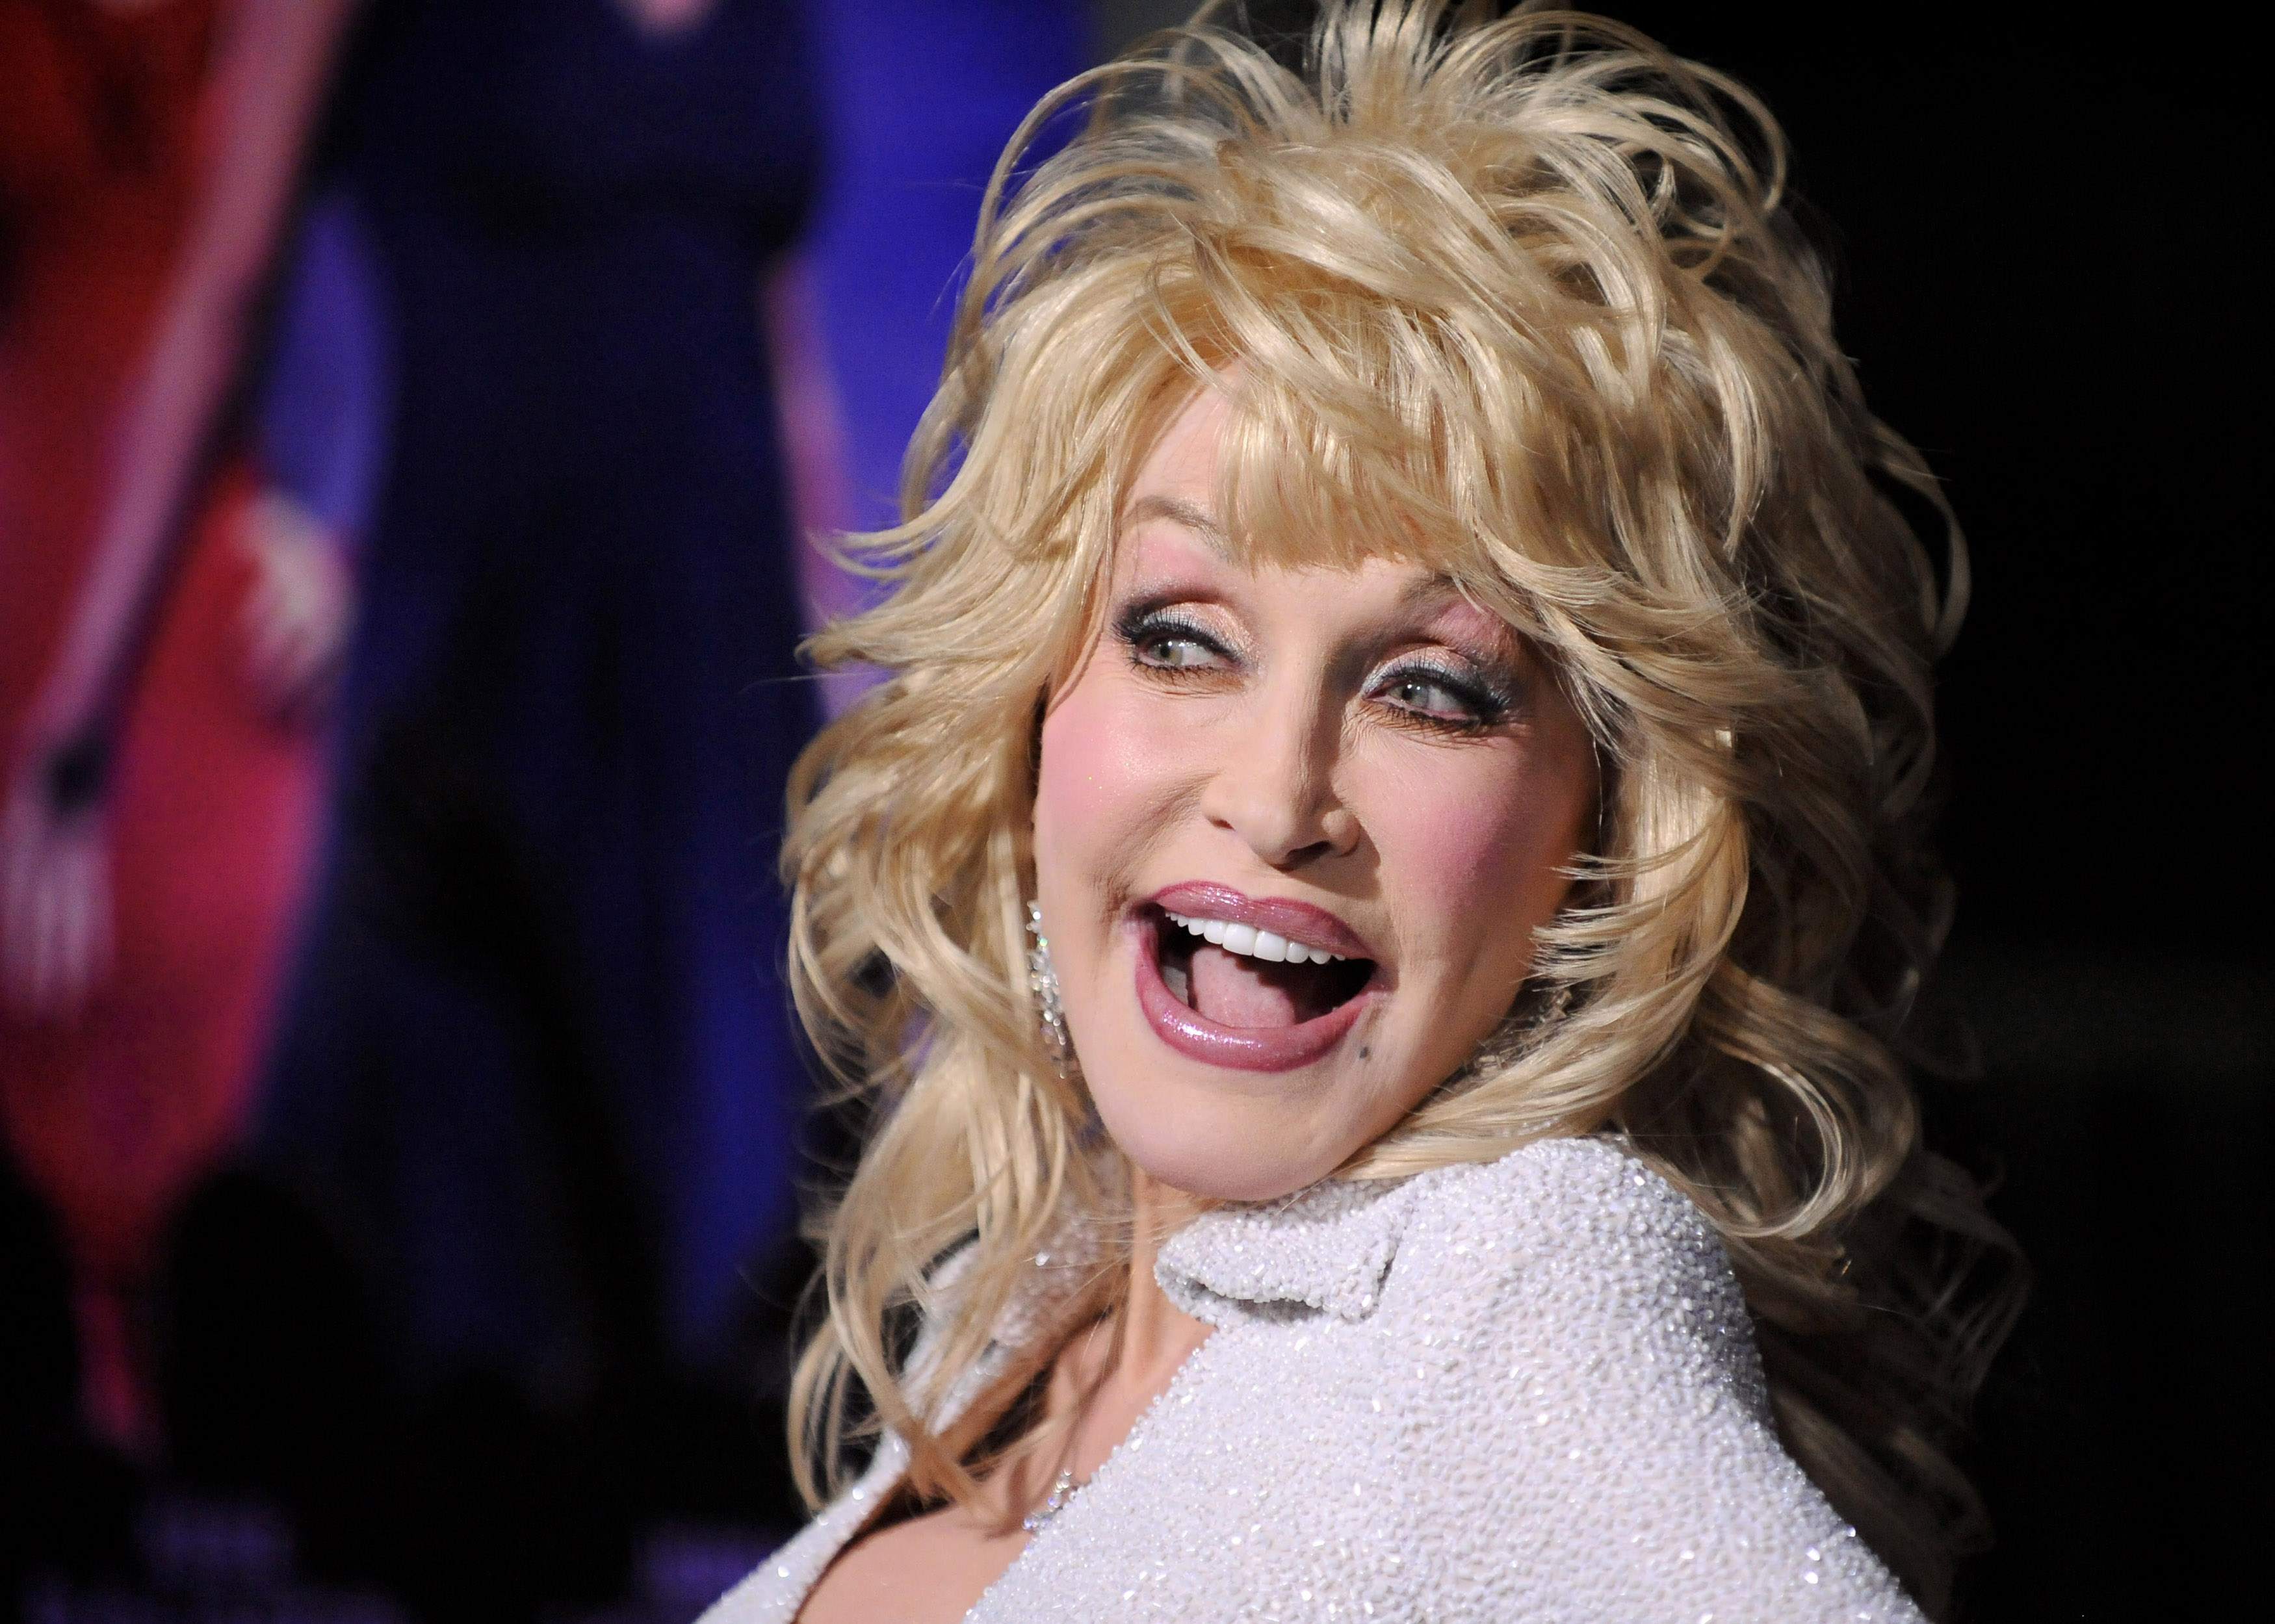 Dolly Parton to renew wedding vows for 50th anniversary to Carl Dean - TODAY.com3500 x 2499